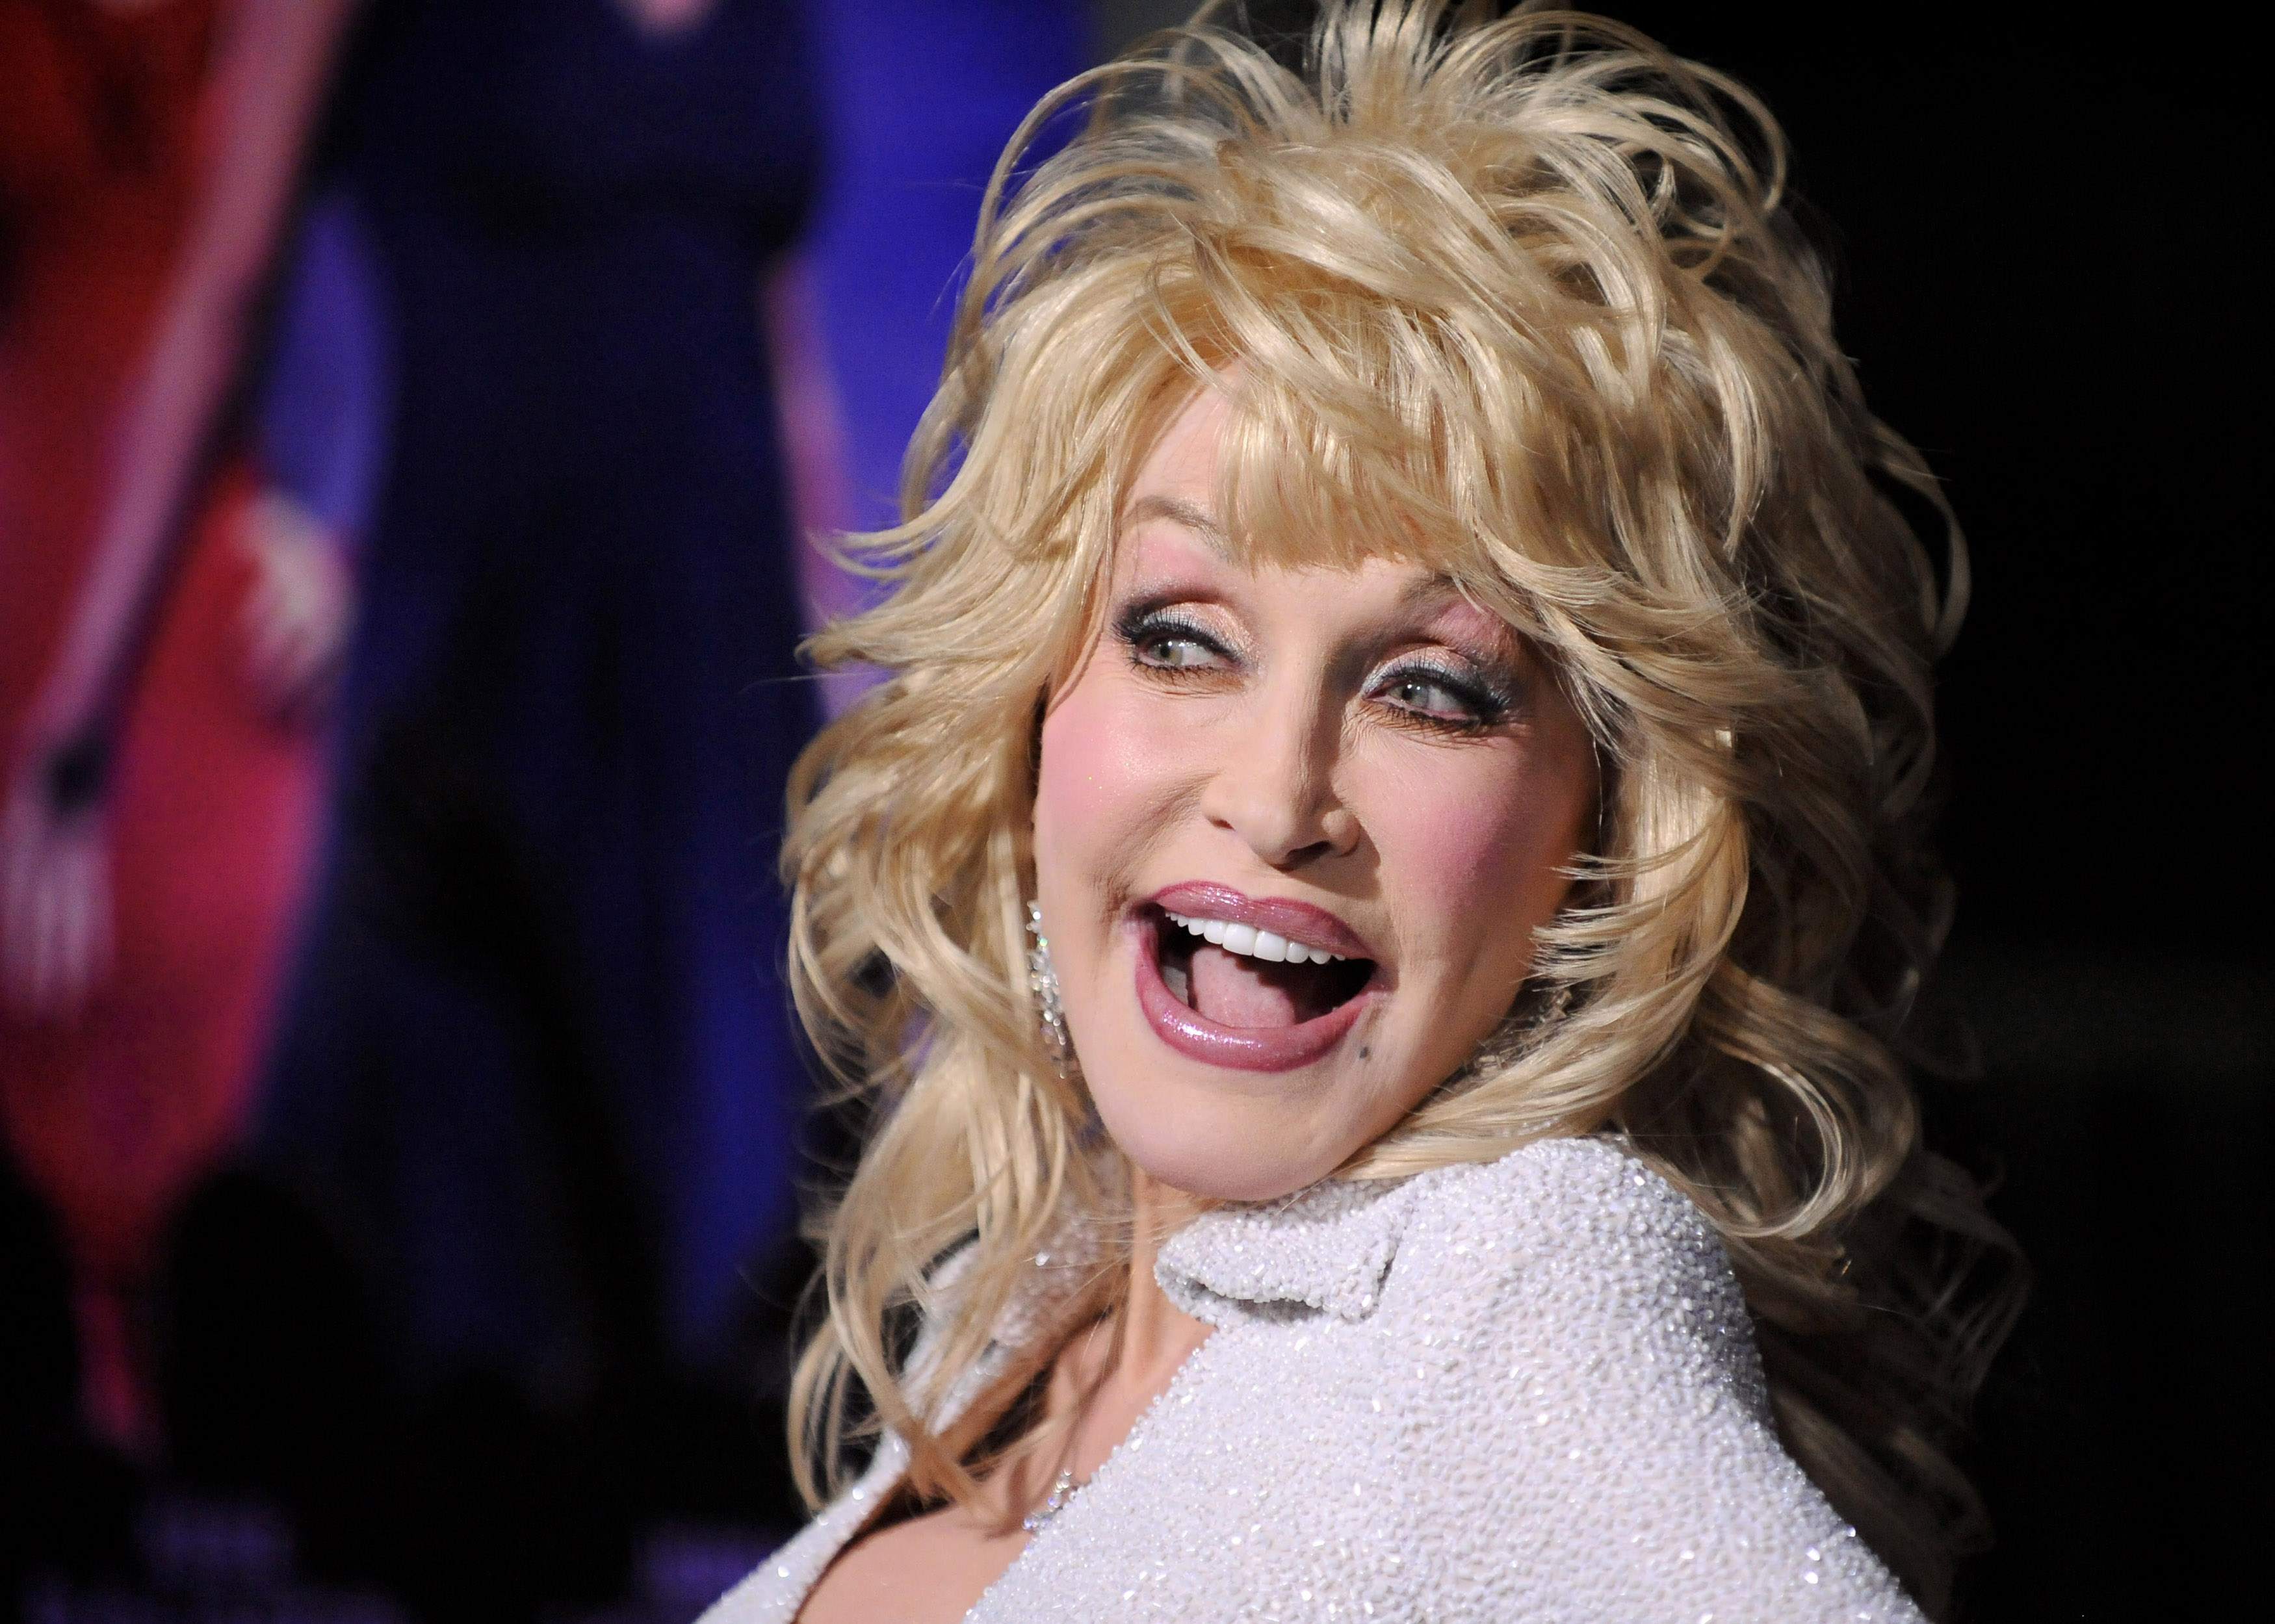 Dolly Parton to renew wedding vows for 50th anniversary to Carl Dean - TODAY.com3500 x 2499